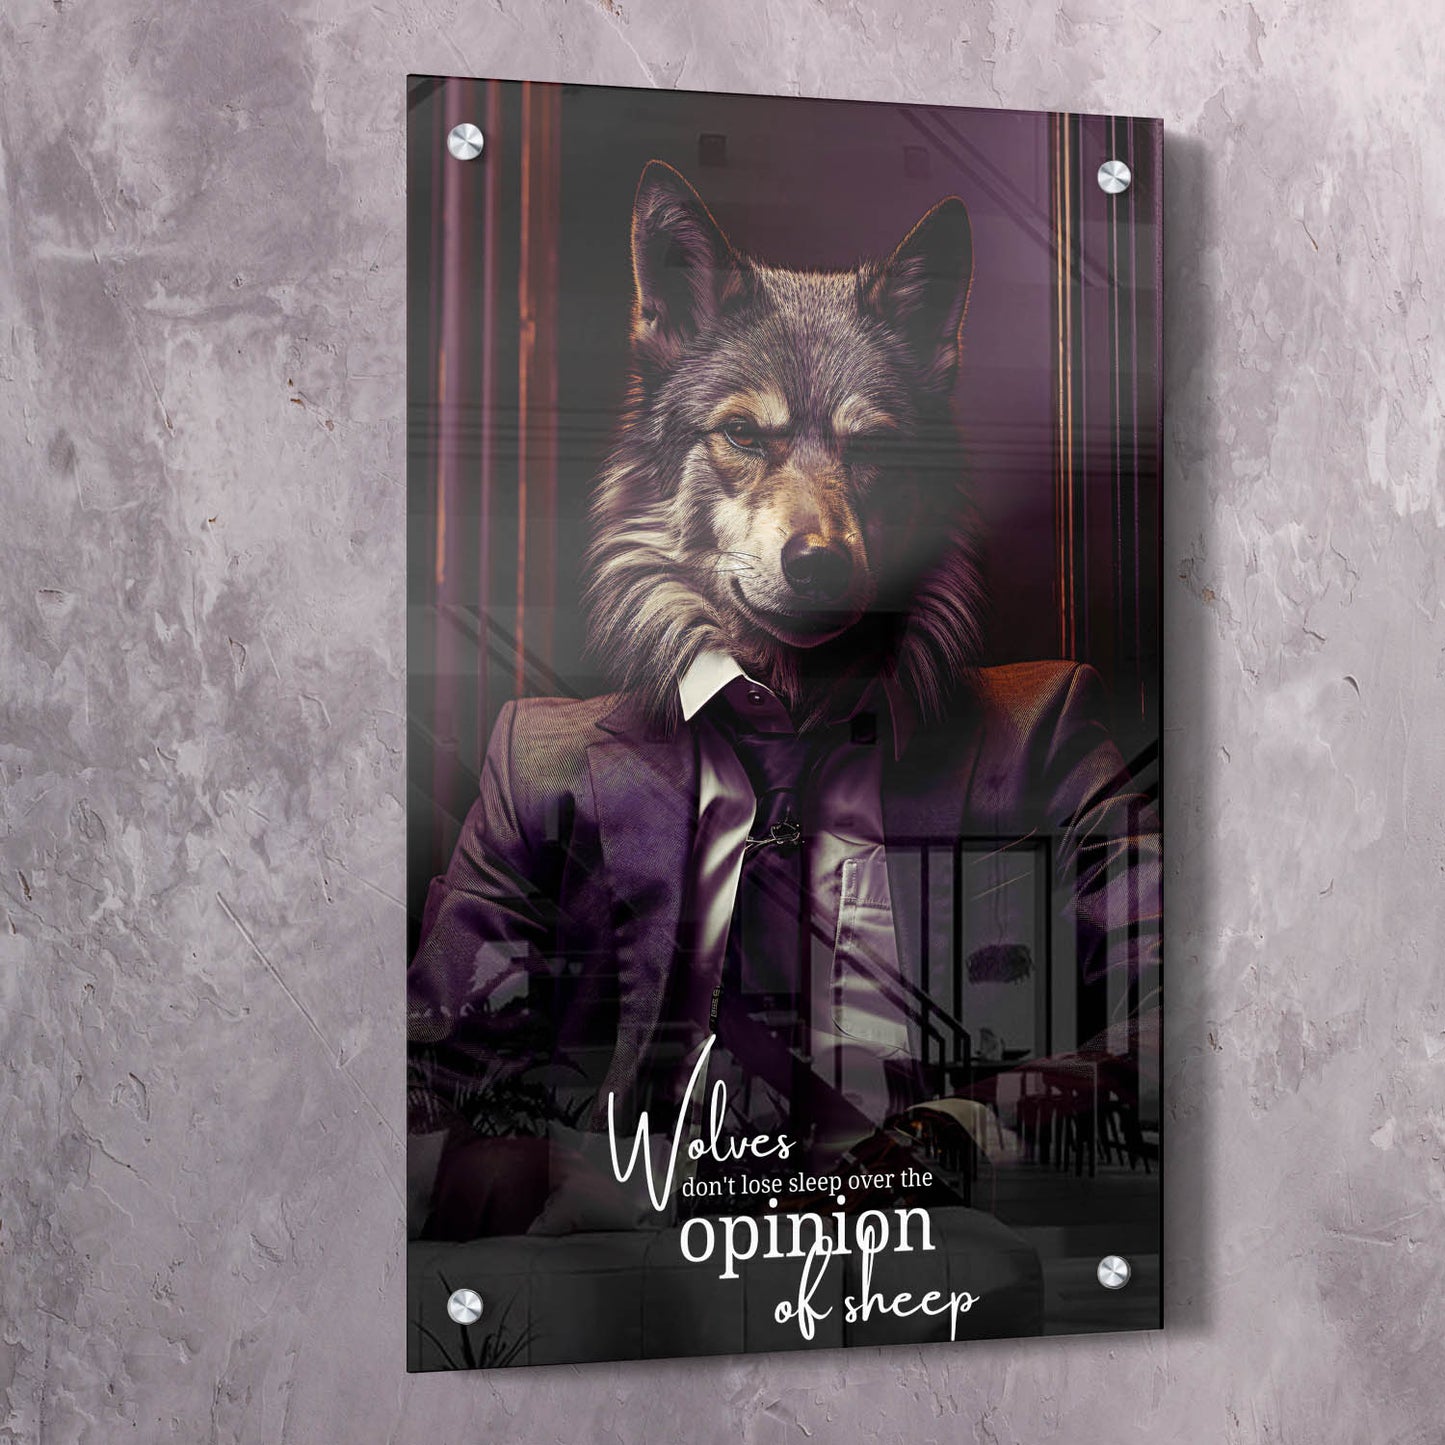 Wolves don't lose sleep over the opinion of sheep Wall Art | Inspirational Wall Art Motivational Wall Art Quotes Office Art | ImpaktMaker Exclusive Canvas Art Portrait